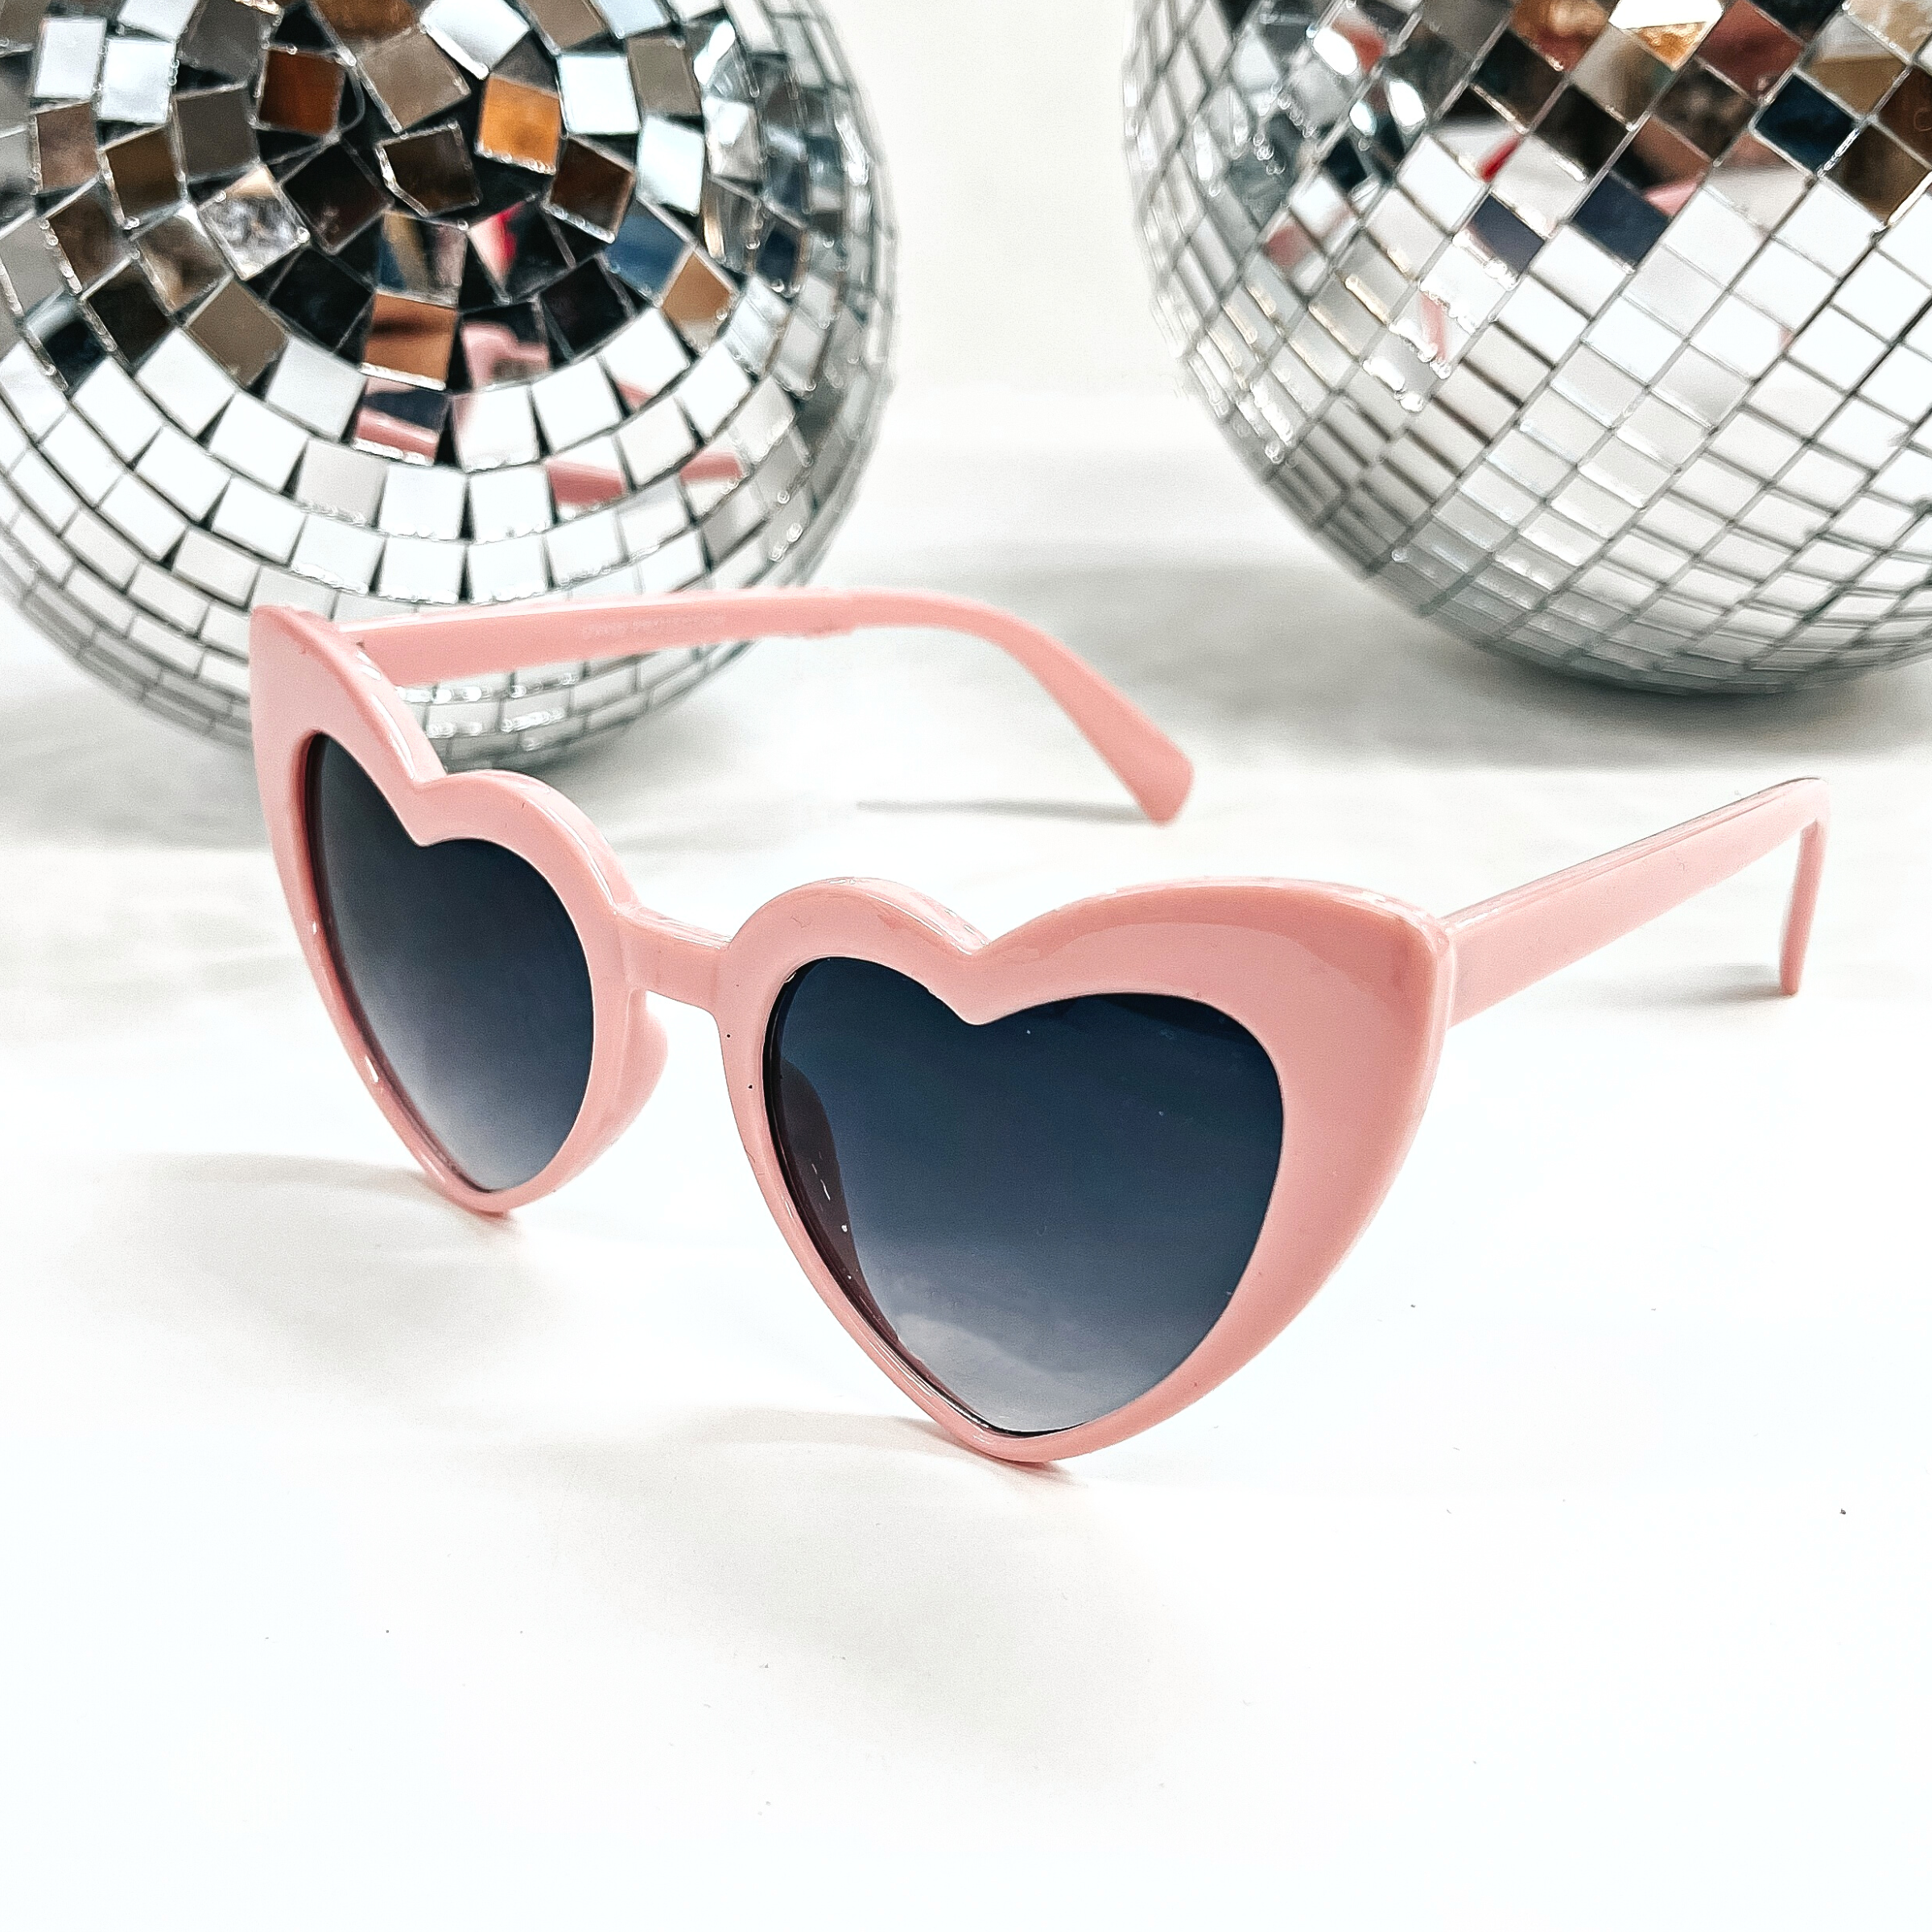 These are heart shaped sunglasses in light pink with black.dark grey lenses. These sunglasses are taken on a white background with two silver disco balls in the back as decor.